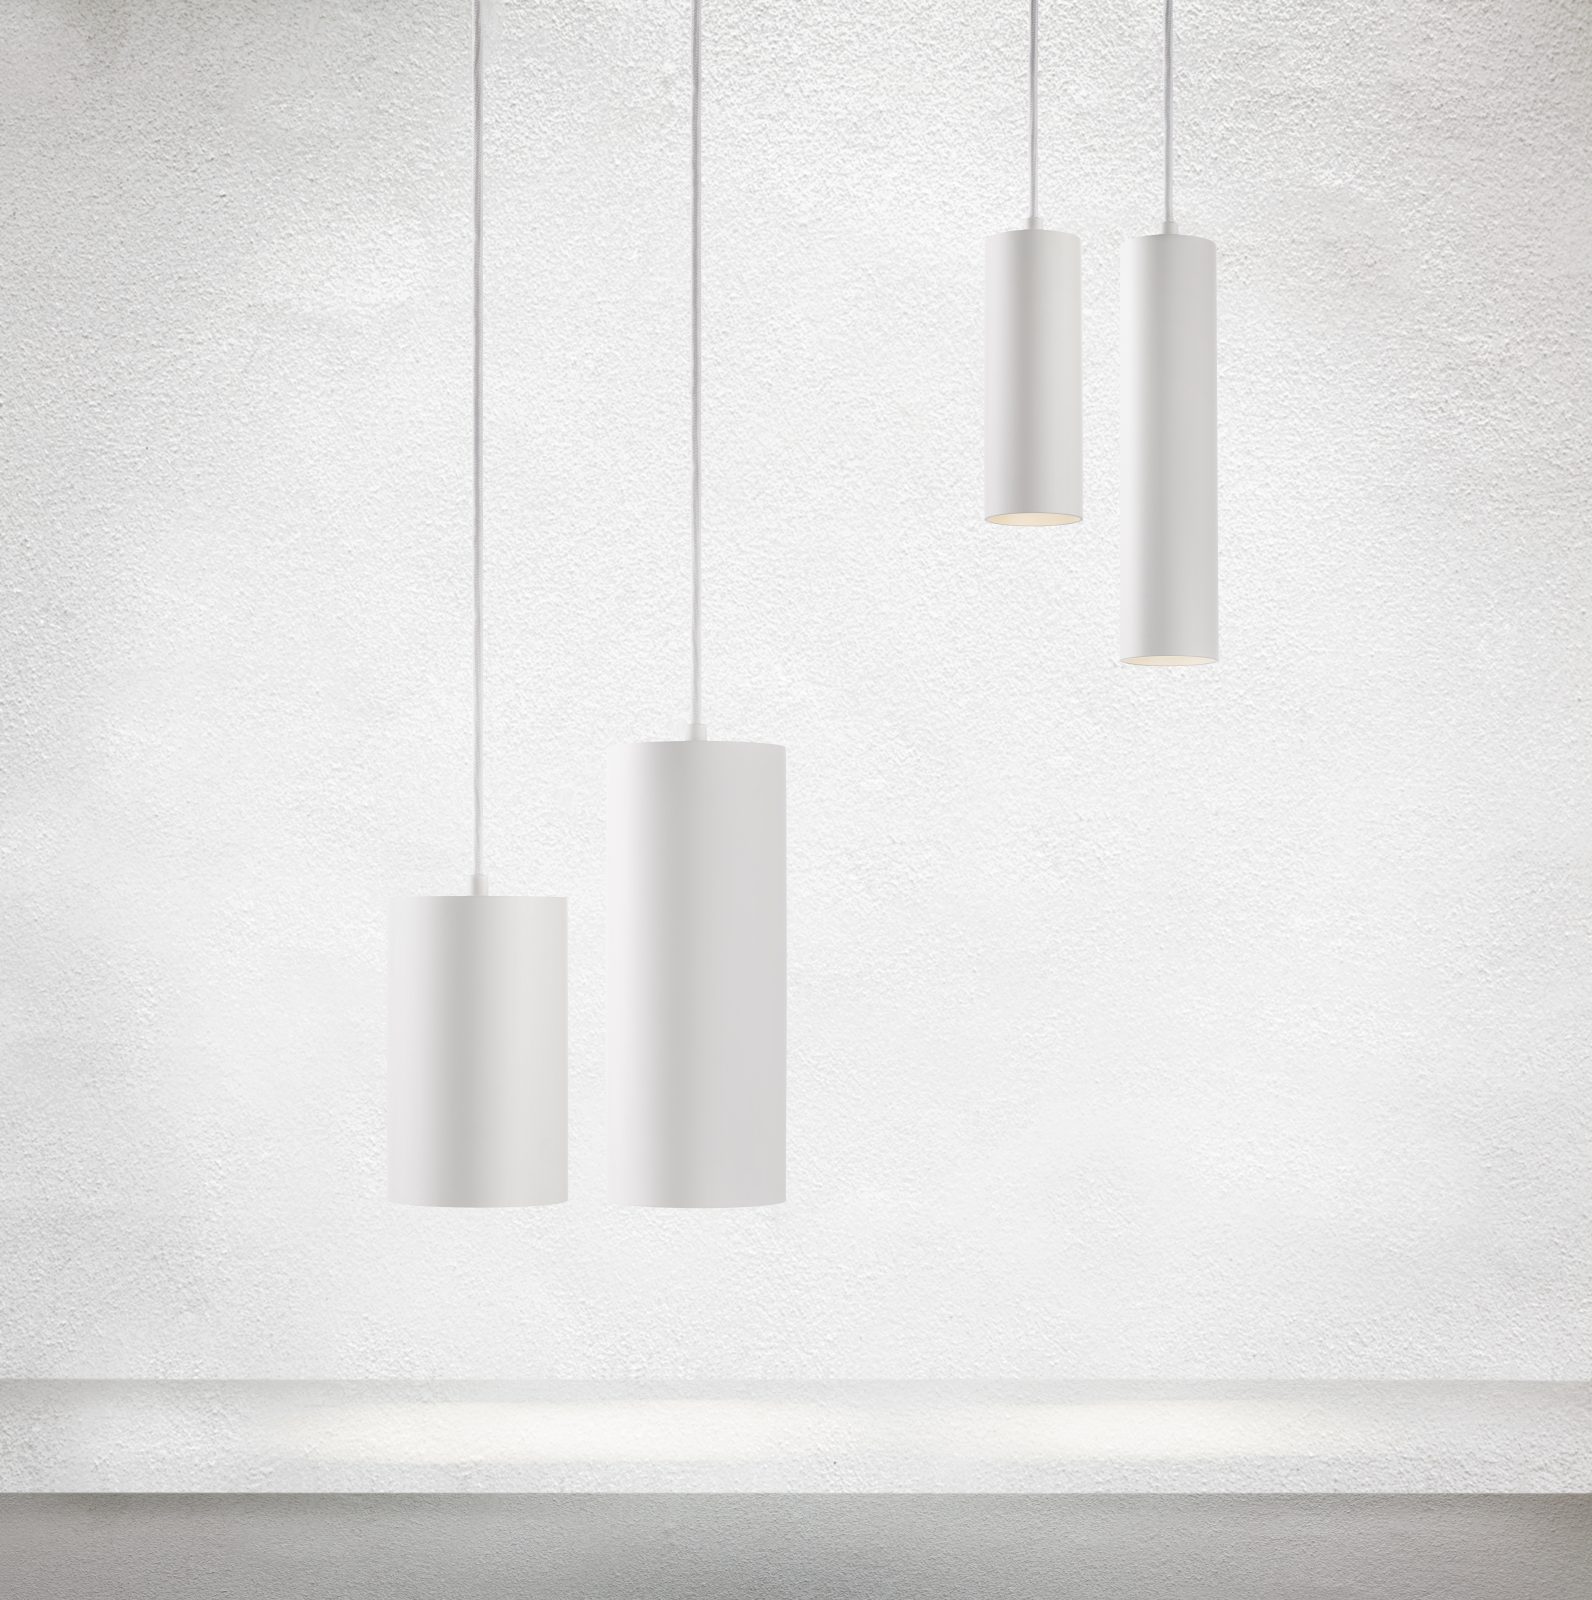 The Light Point Zero S pendant lamp was designed by Ronni Gol and is a  modern classic Scandinavian design, available in various sizes and colors.